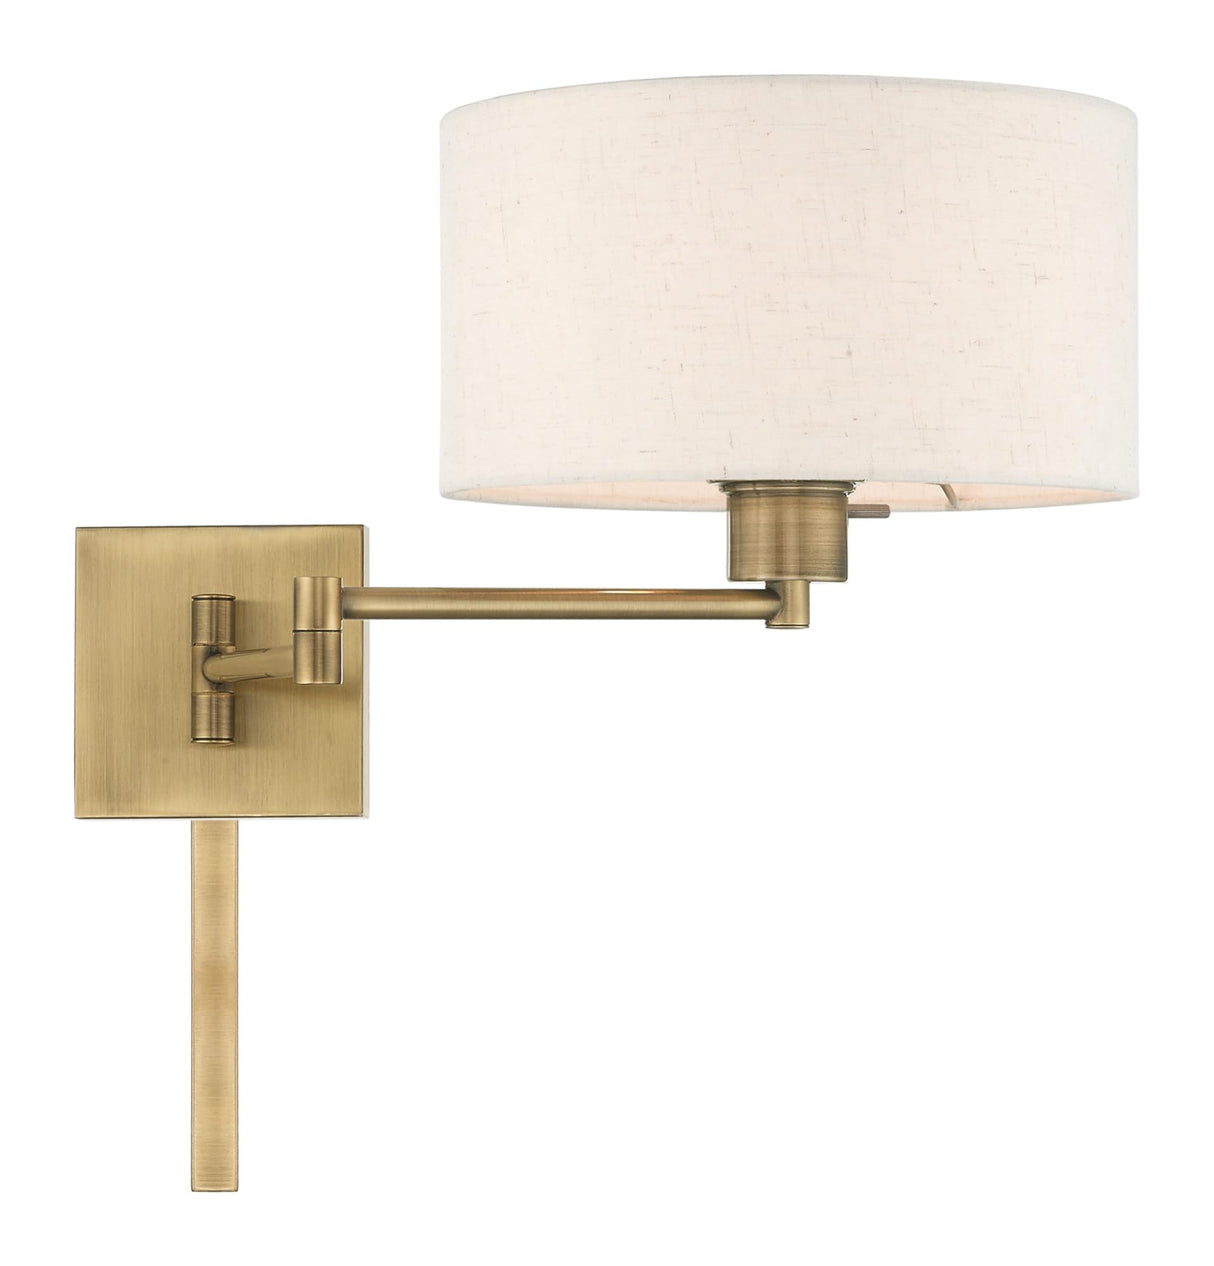 Livex Lighting 40037-01 24.25" One Light Swing Arm Wall Mount, Antique Brass Finish with Oatmeal Fabric Shade